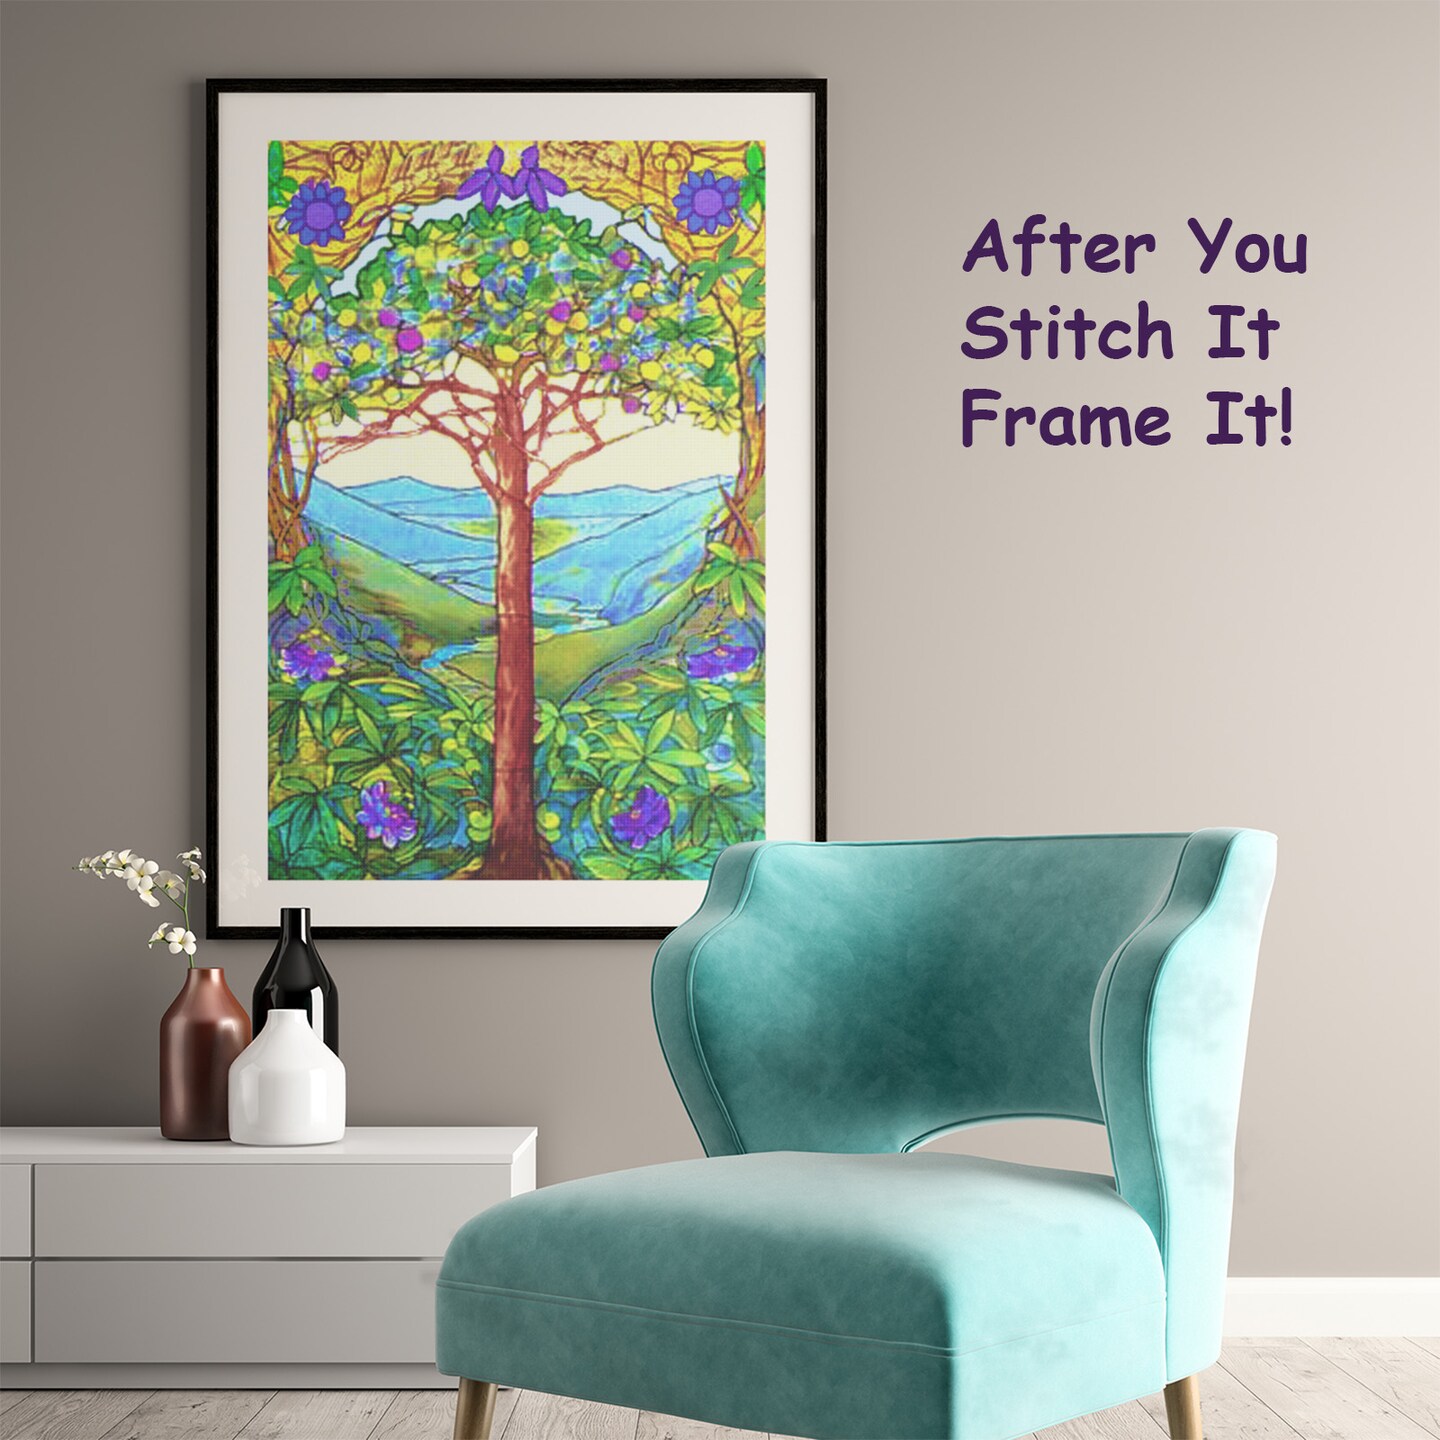 The Tree of Life Inspired by Louis Comfort Tiffany Counted Cross Stitch Pattern by Orenco Originals LLC | Michaels